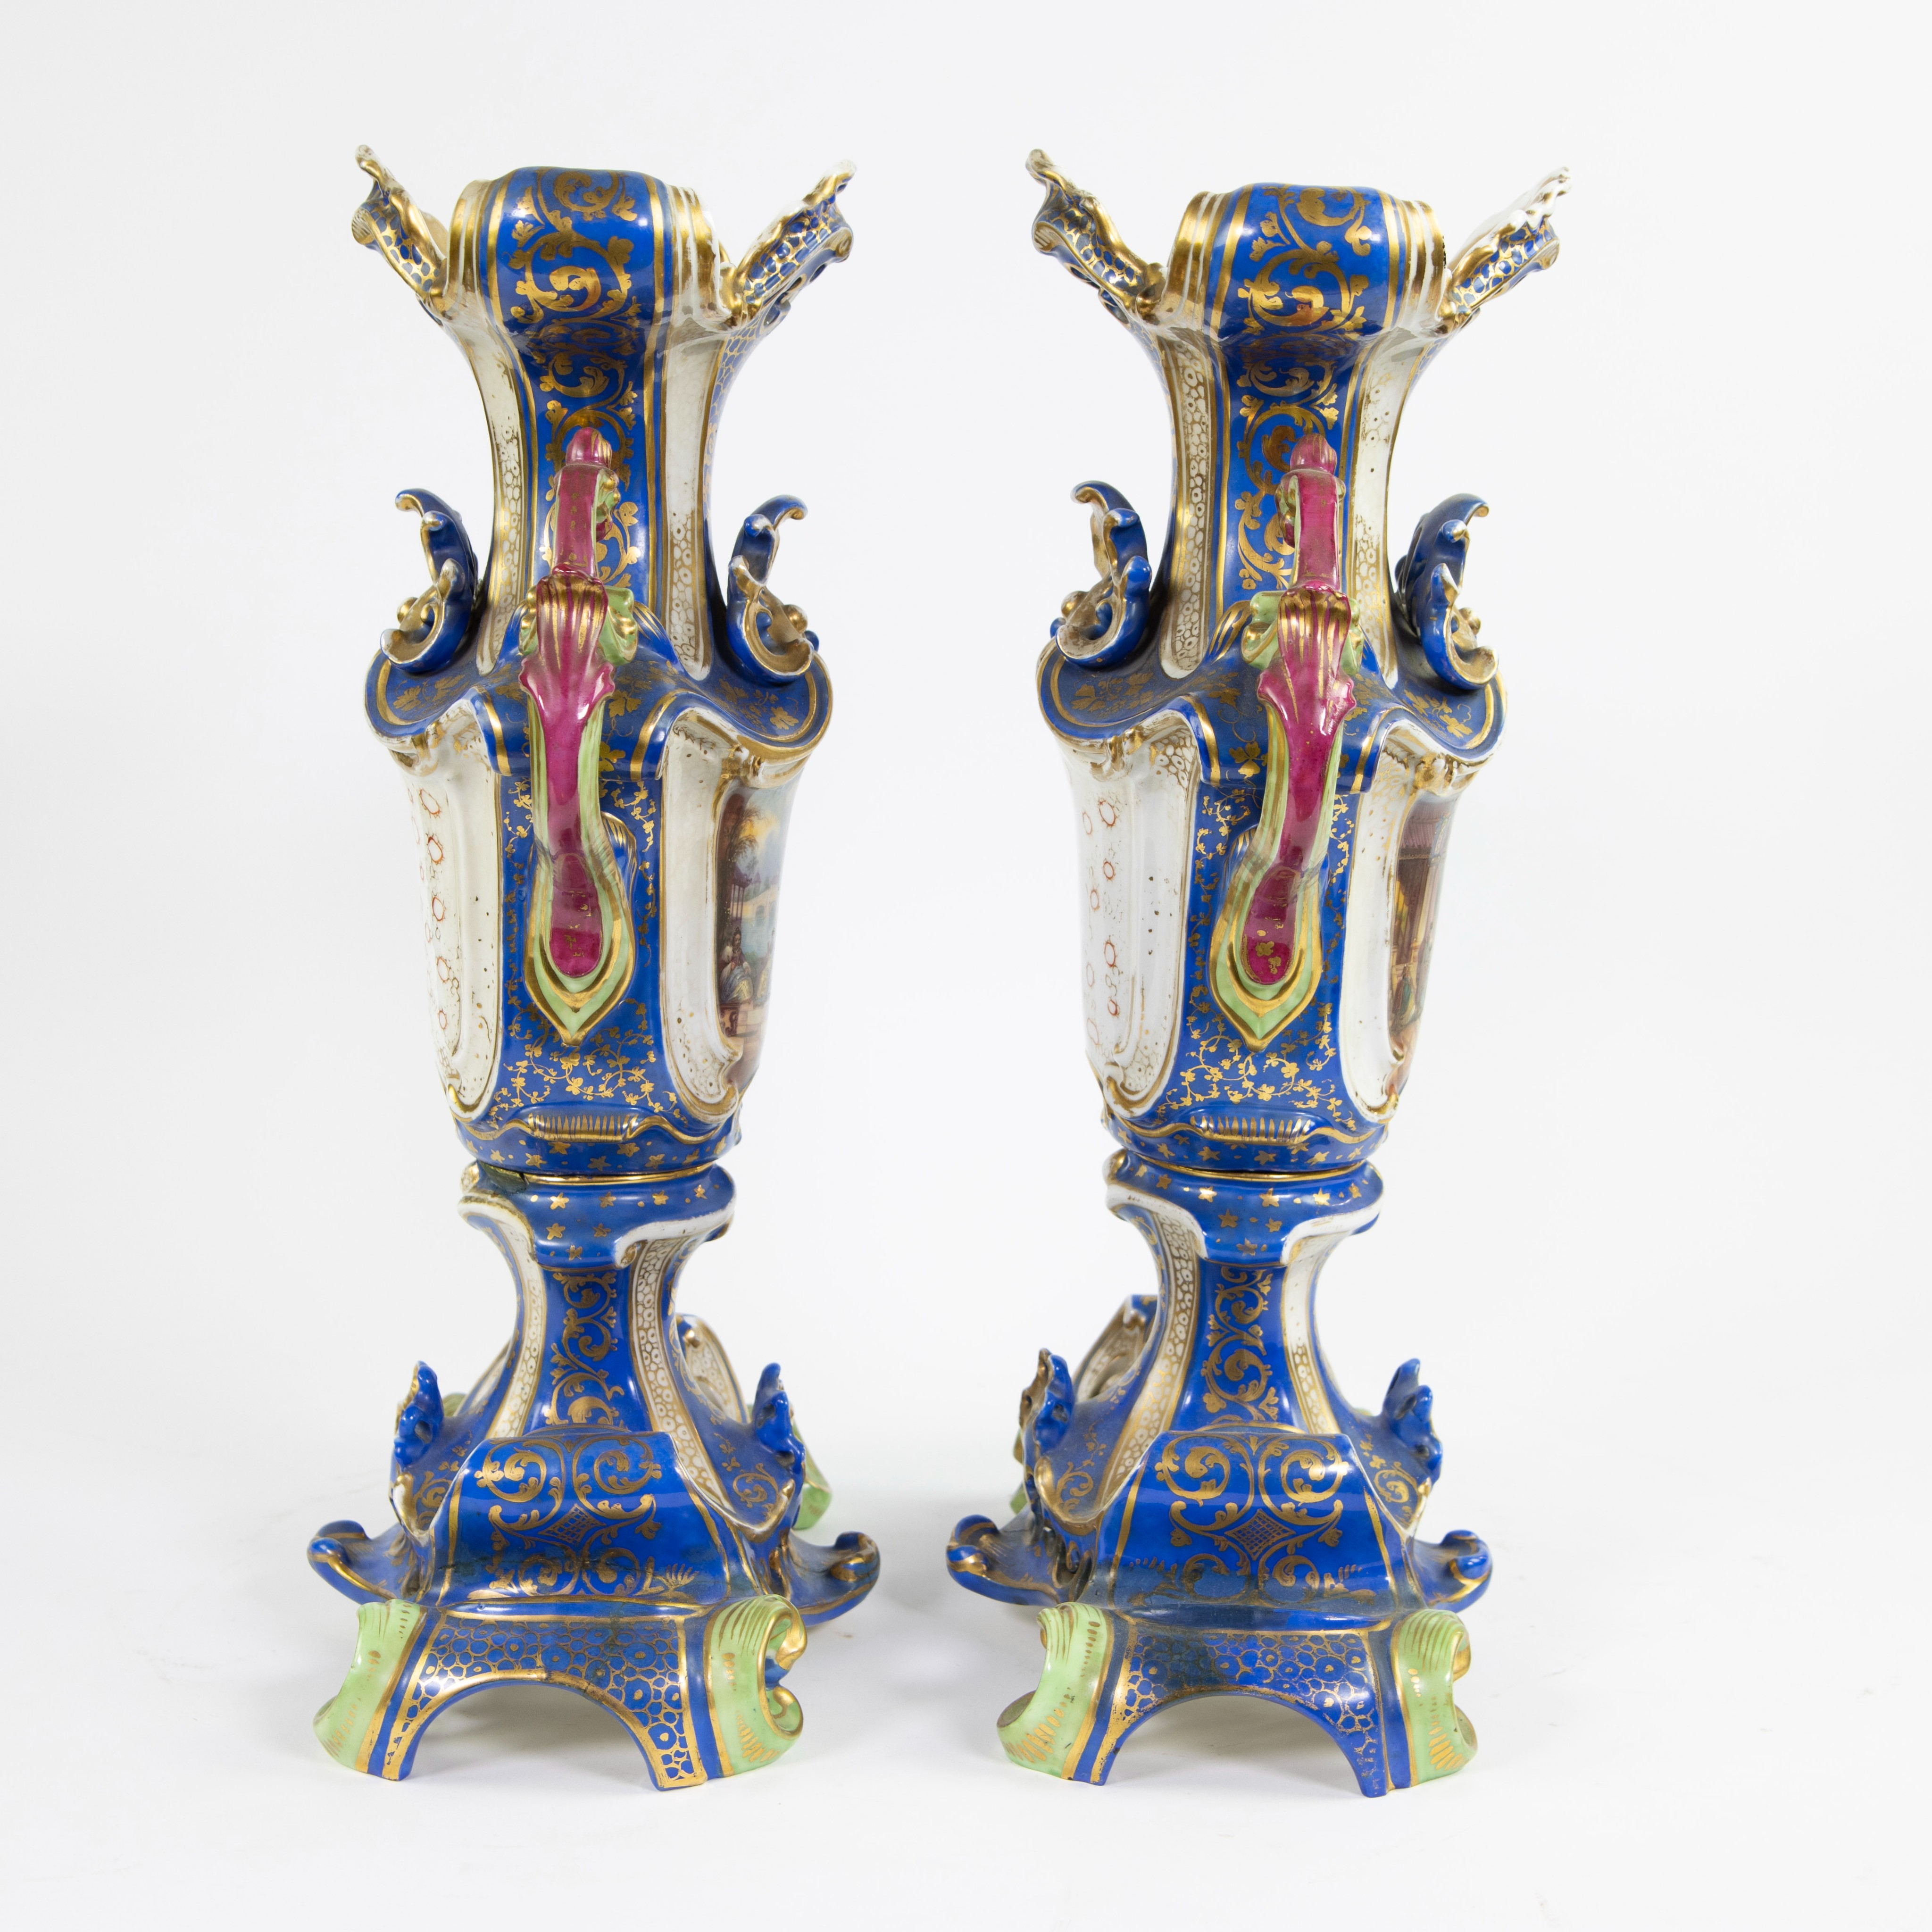 A pair of handpainted porcelain vases in the manner of Jacob Petit, Paris, France, ca 1850 - Image 4 of 5